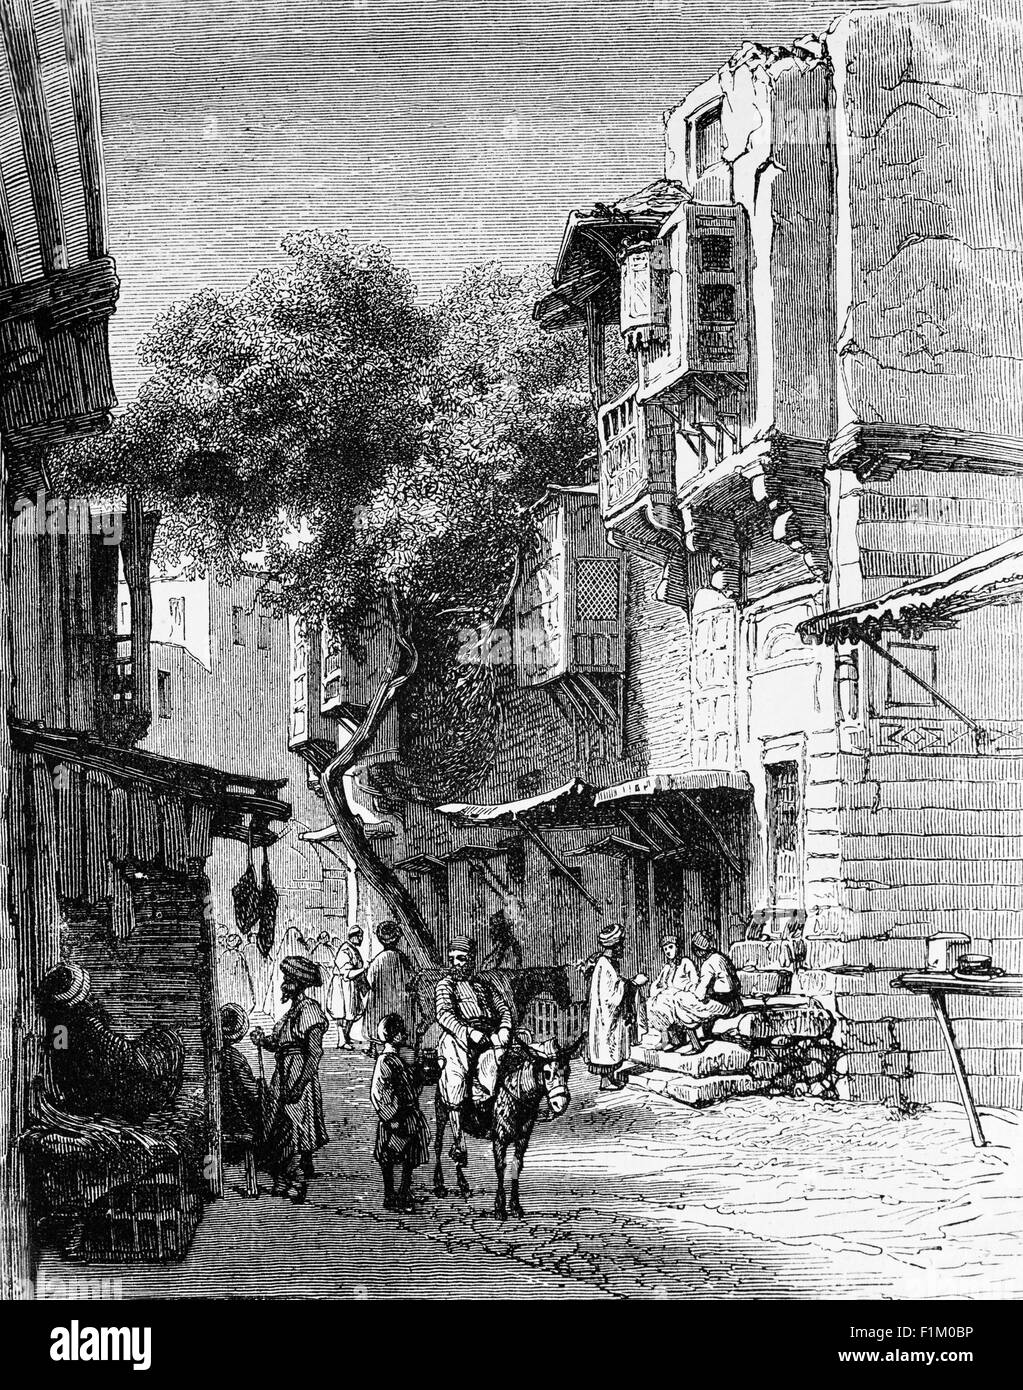 A street scene in 19th Century Cairo, the capital of Egypt. Located near the Nile Delta, Cairo was founded in 969 AD by the Fatimid dynasty, but the land composing the present-day city was the site of ancient national capitals whose remnants remain visible in parts of Old Cairo. Cairo has long been a centre of the region's political and cultural life, and is titled 'the city of a thousand minarets' for its preponderance of Islamic architecture. Stock Photo